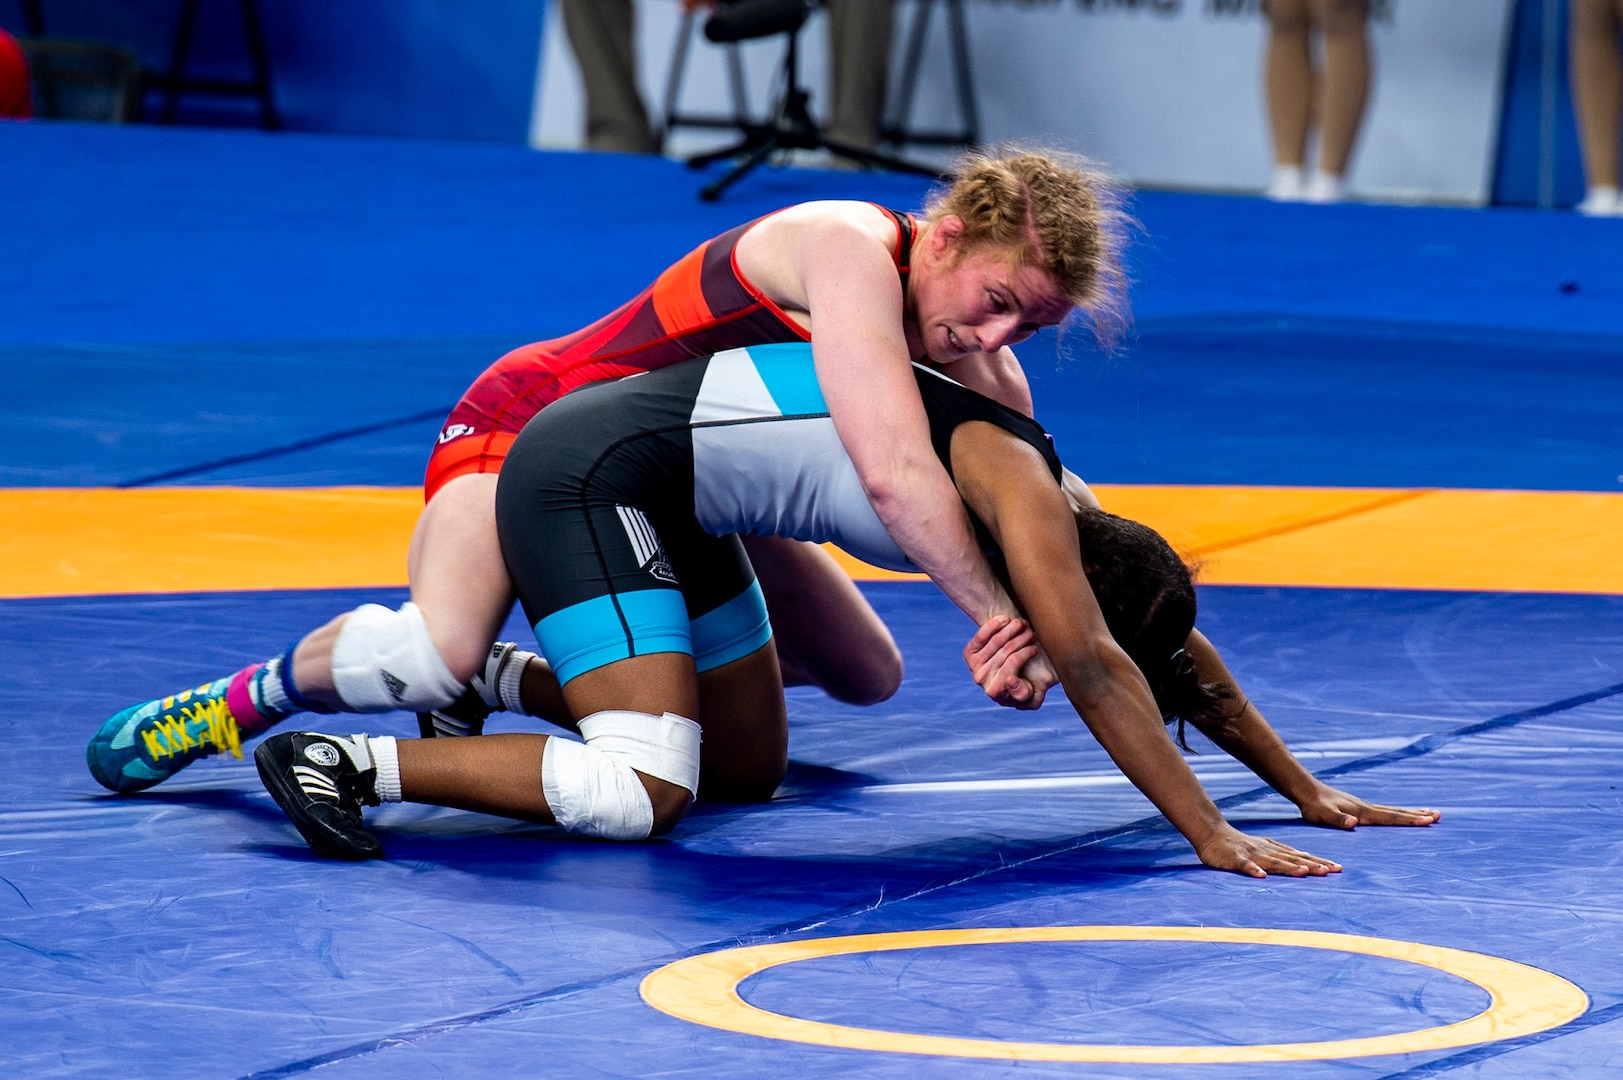 Army Staff Sgt. Whitney Conder with the U.S. Armed Forces Wrestling Team competes against Nada Ashour of Egypt in the 50kg. weight class at the Military World Games in Wuhan, China, Oct. 22, 2019. Conder prevailed 11-0 and earned a silver medal in the games. (DoD photo by Mass Communication Specialist 1st Class Ian Carver)